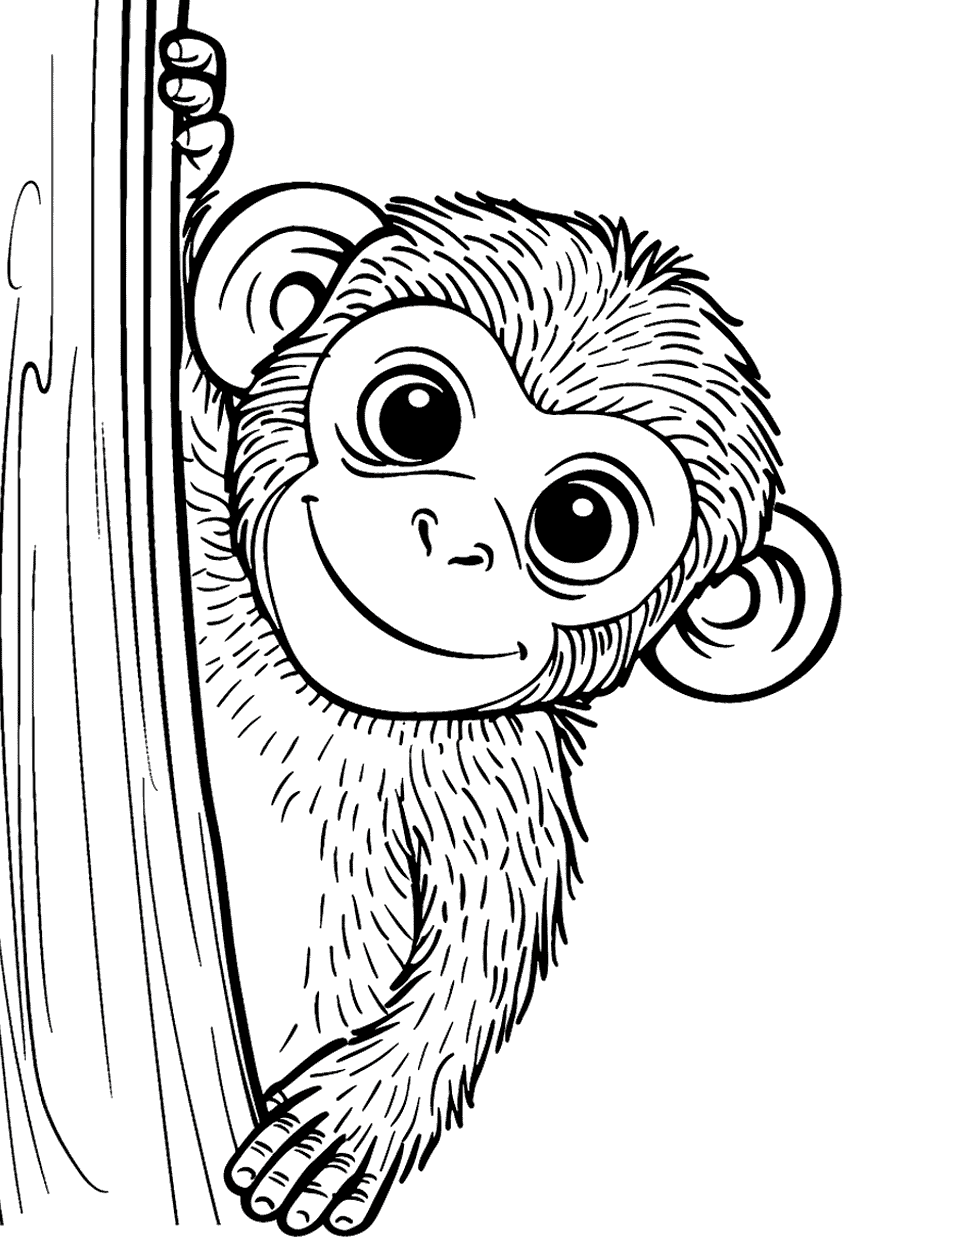 Curious Monkey Peeking Coloring Page - A monkey peeking out from behind a tree.